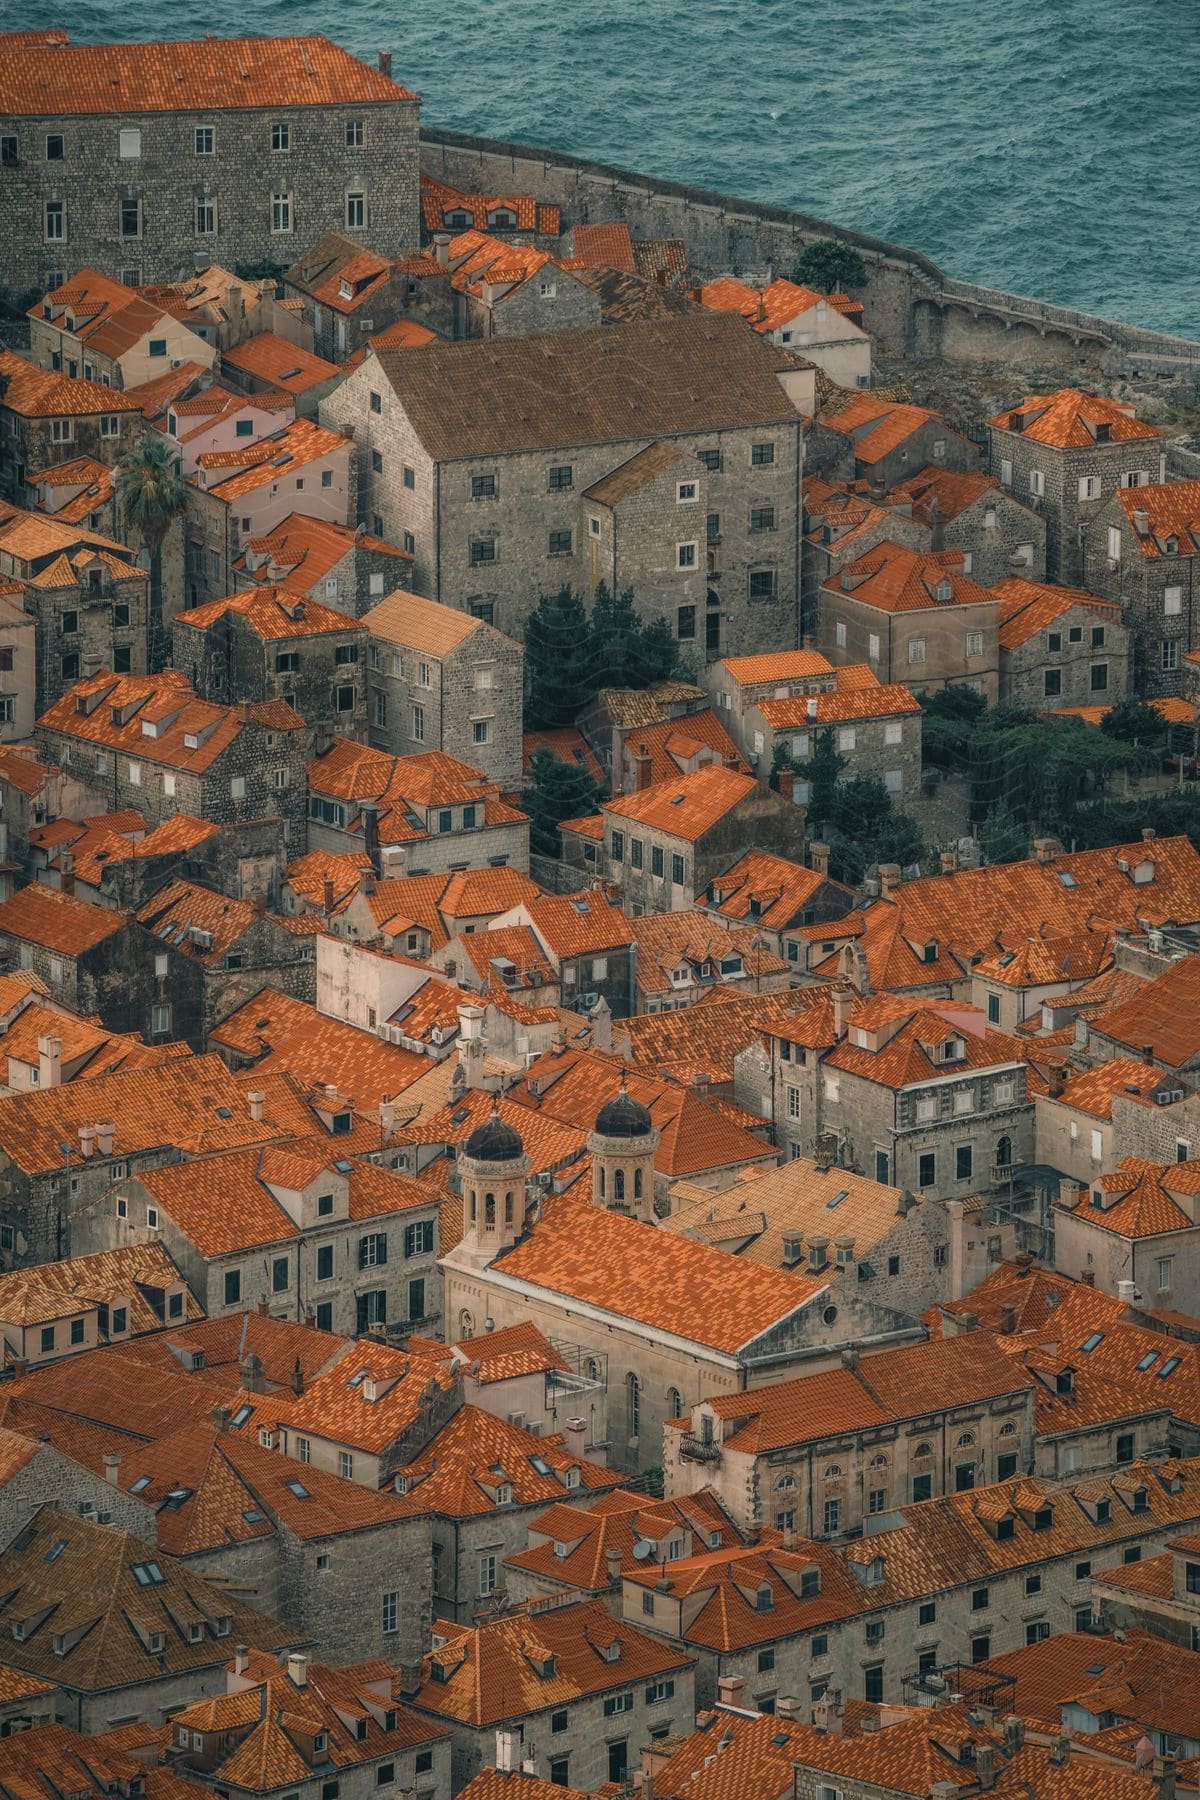 Aerial view of a city with buildings and tile roofs